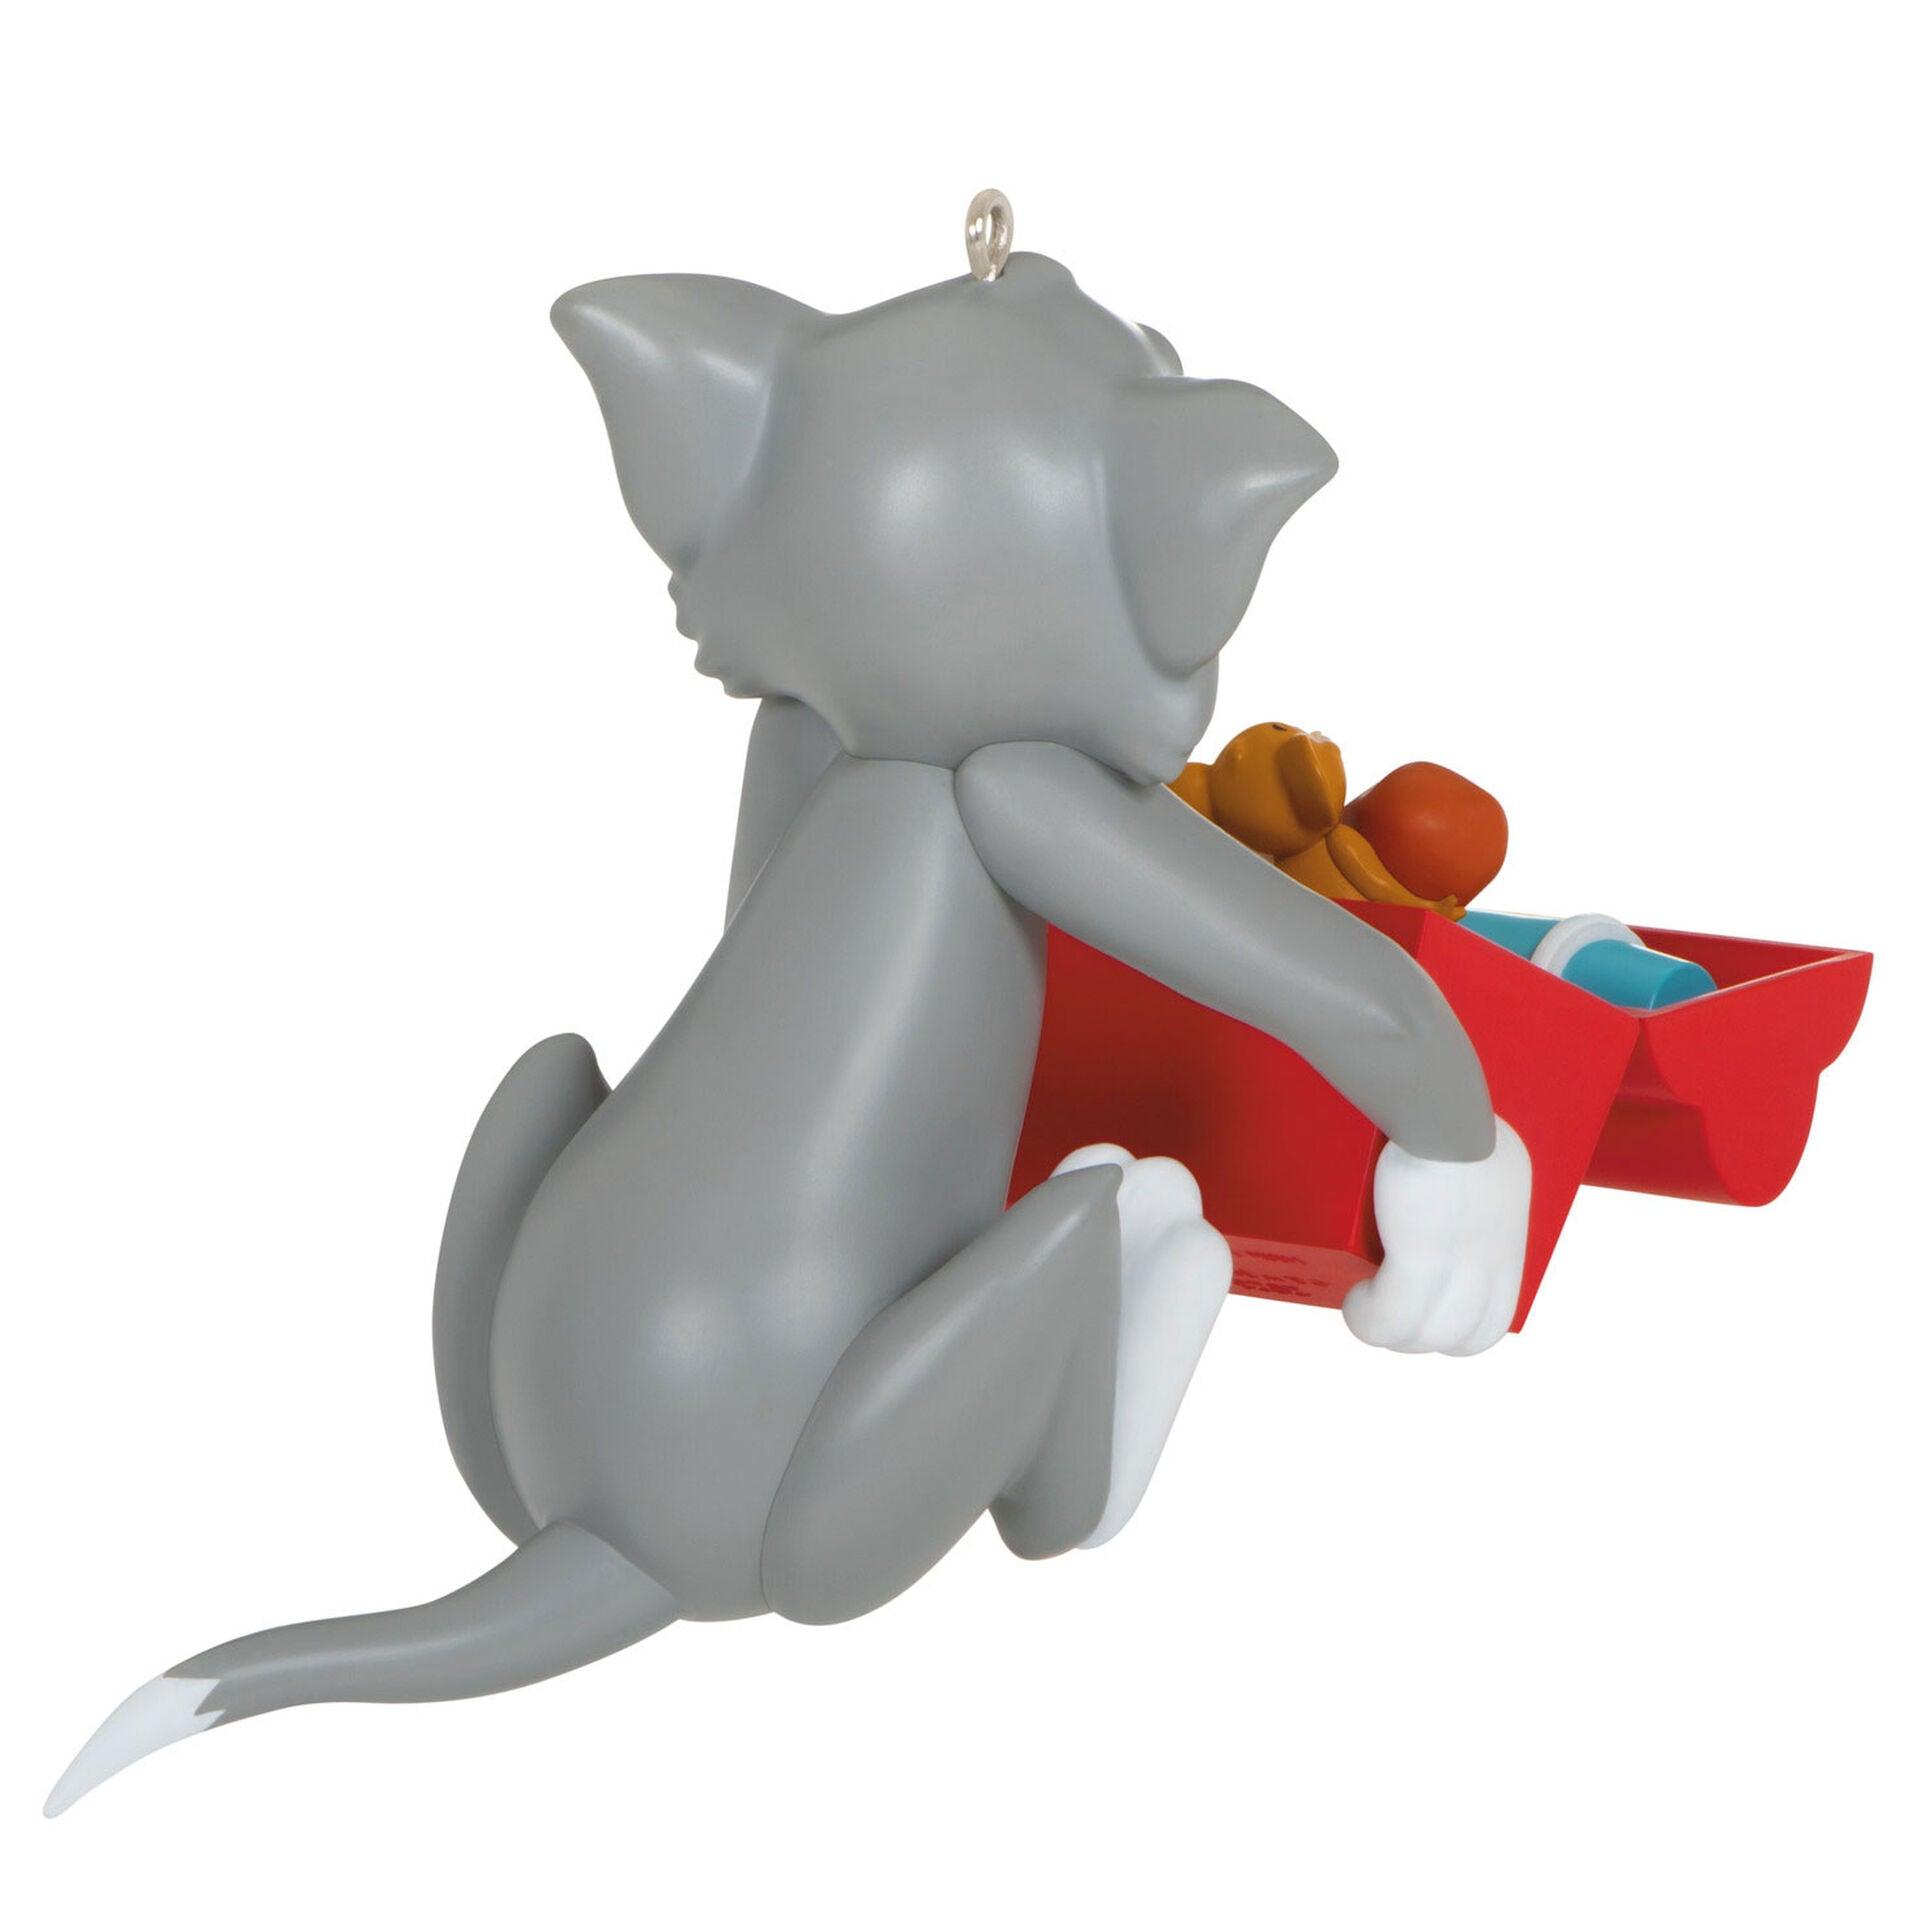 Tom and Jerry™ What's for Lunch? Ornament